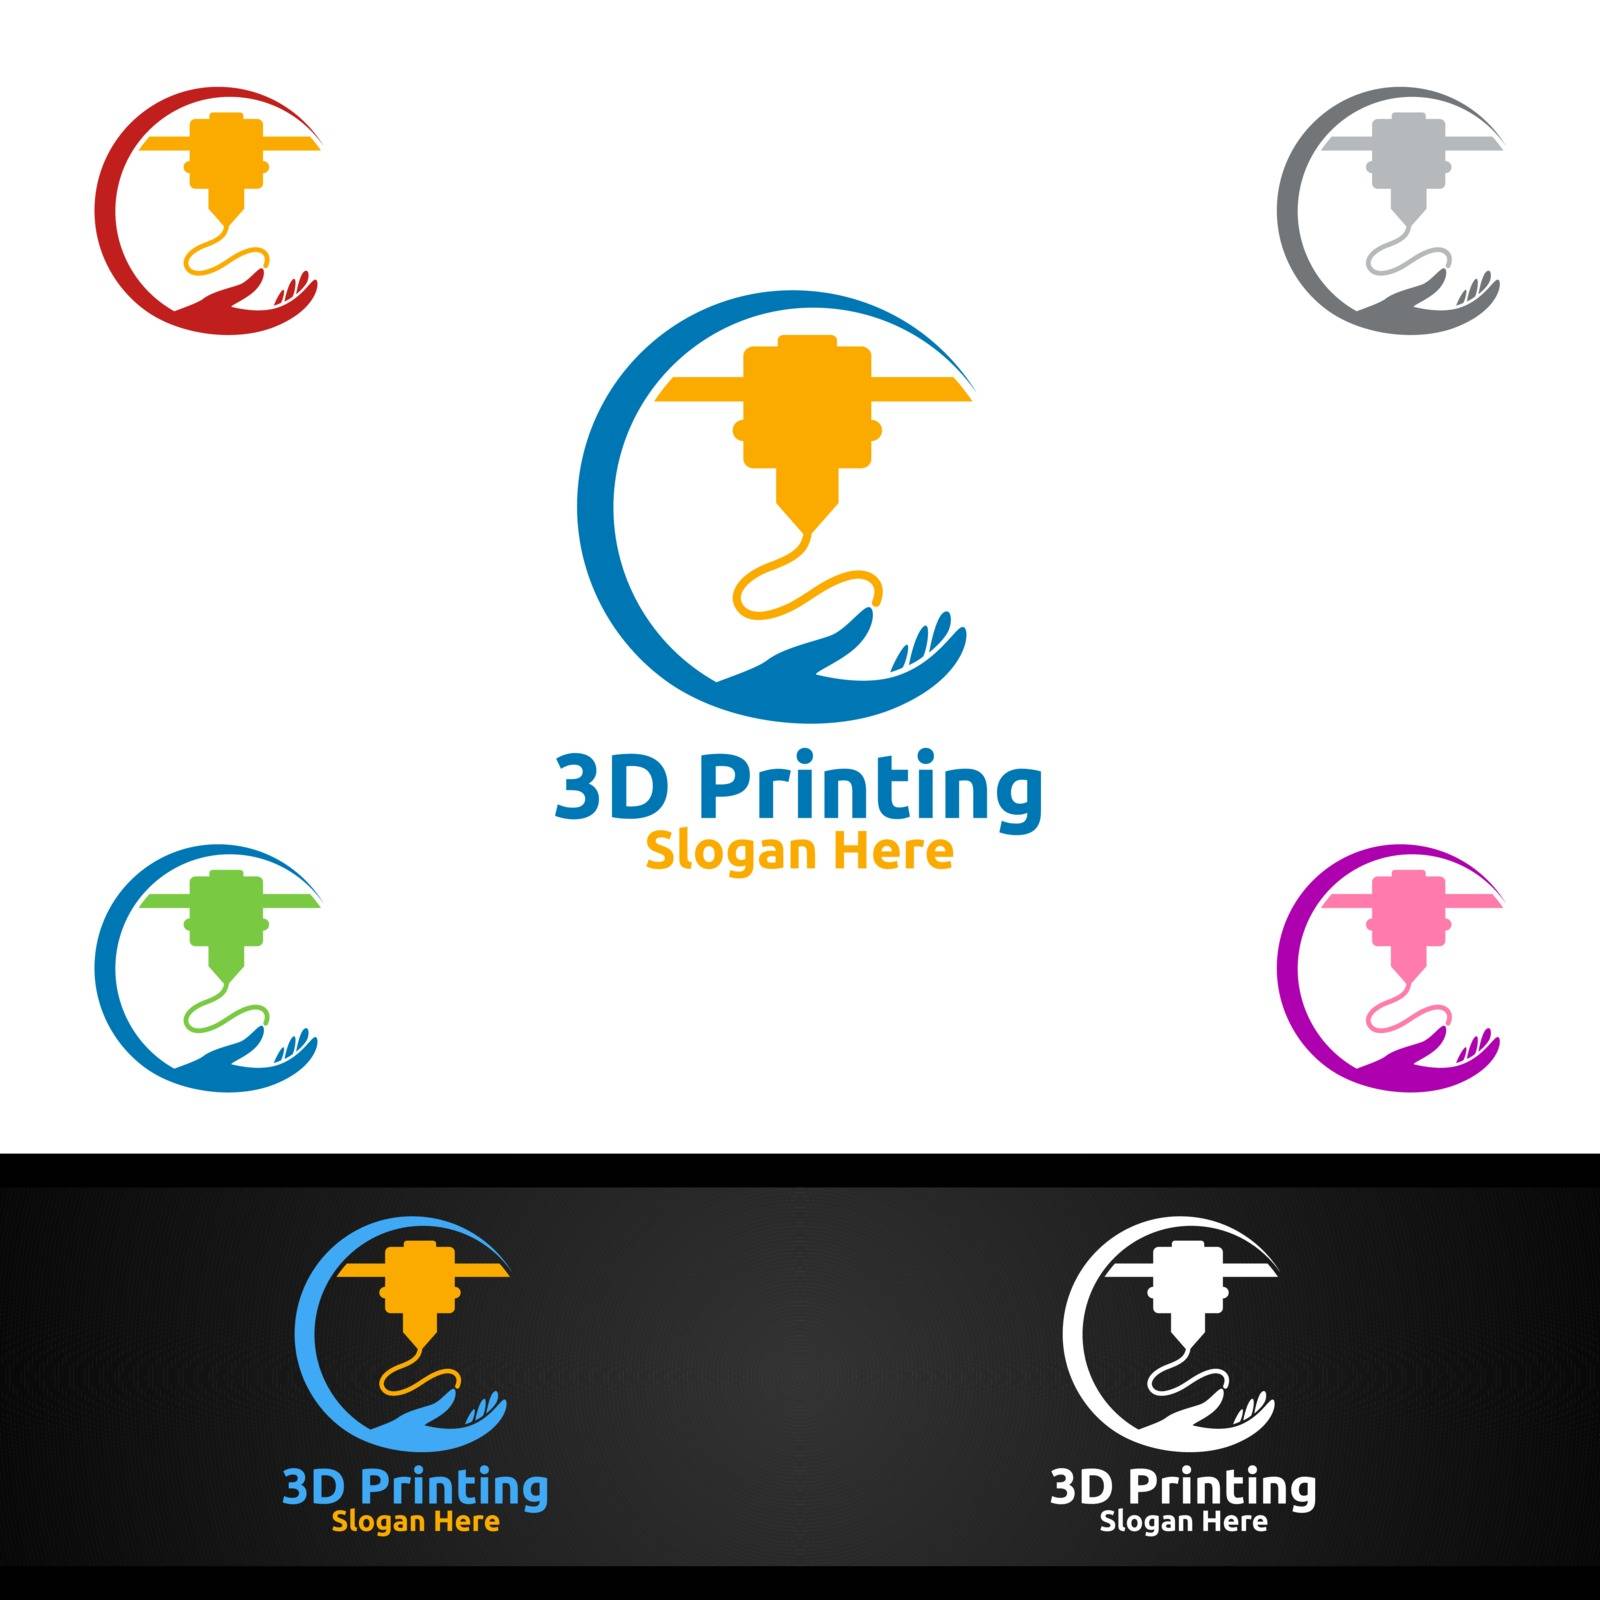 Diy 3D Printing Company Vector Logo Design for Media, Retail, Advertising, Newspaper or Book Concept by denayuneyi